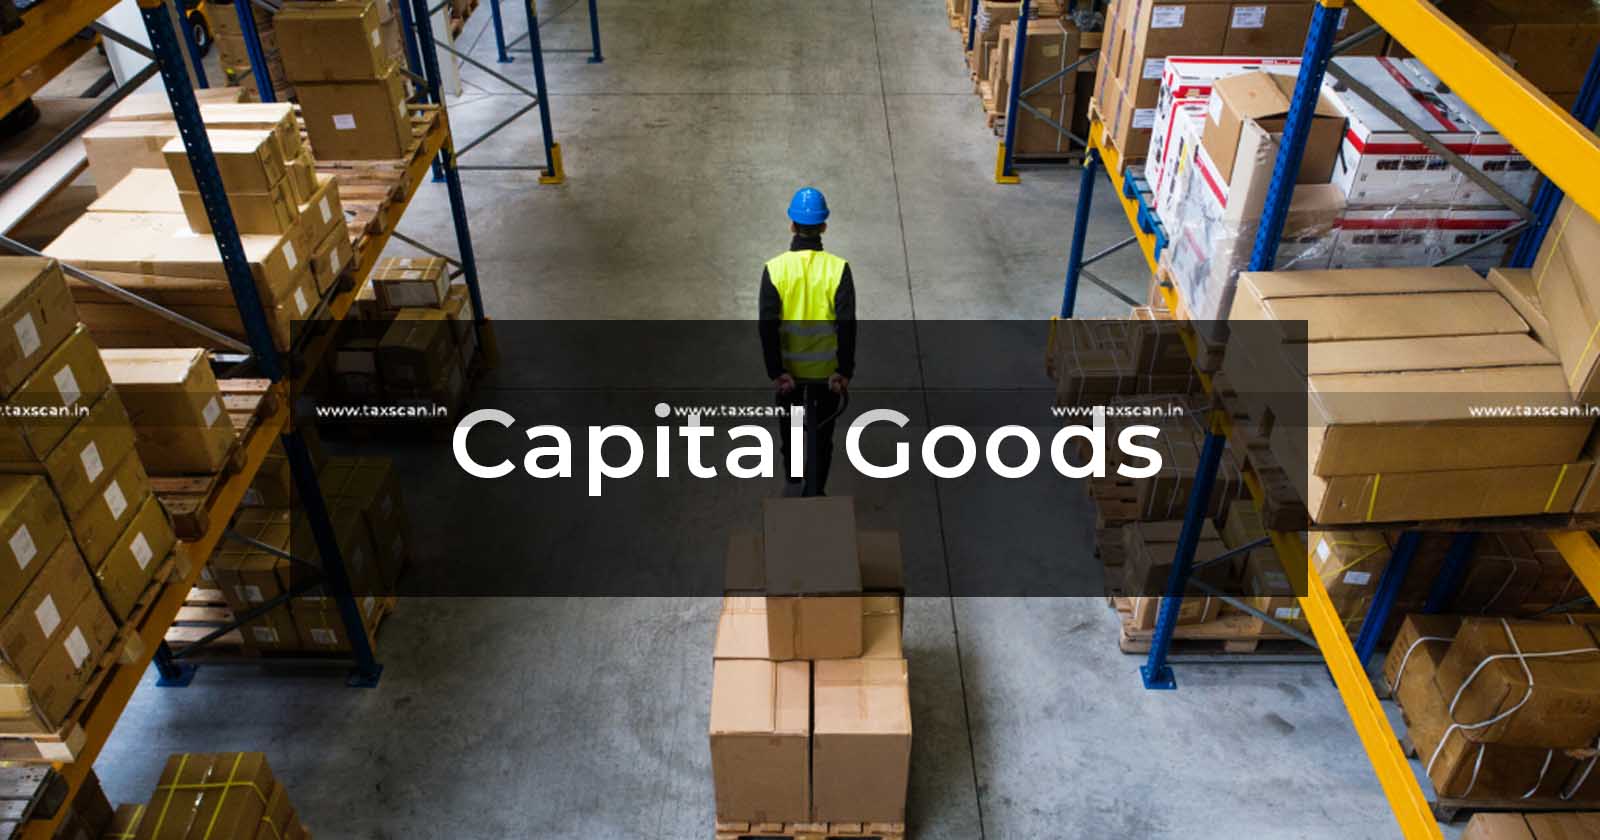 Capital-Goods - Fabricating -Structural- Support - Machinery - Manufacturing- Excisable- Goods - Eligible - CENVAT -credit - Excise -Duty-CESTAT-TAXSCAN